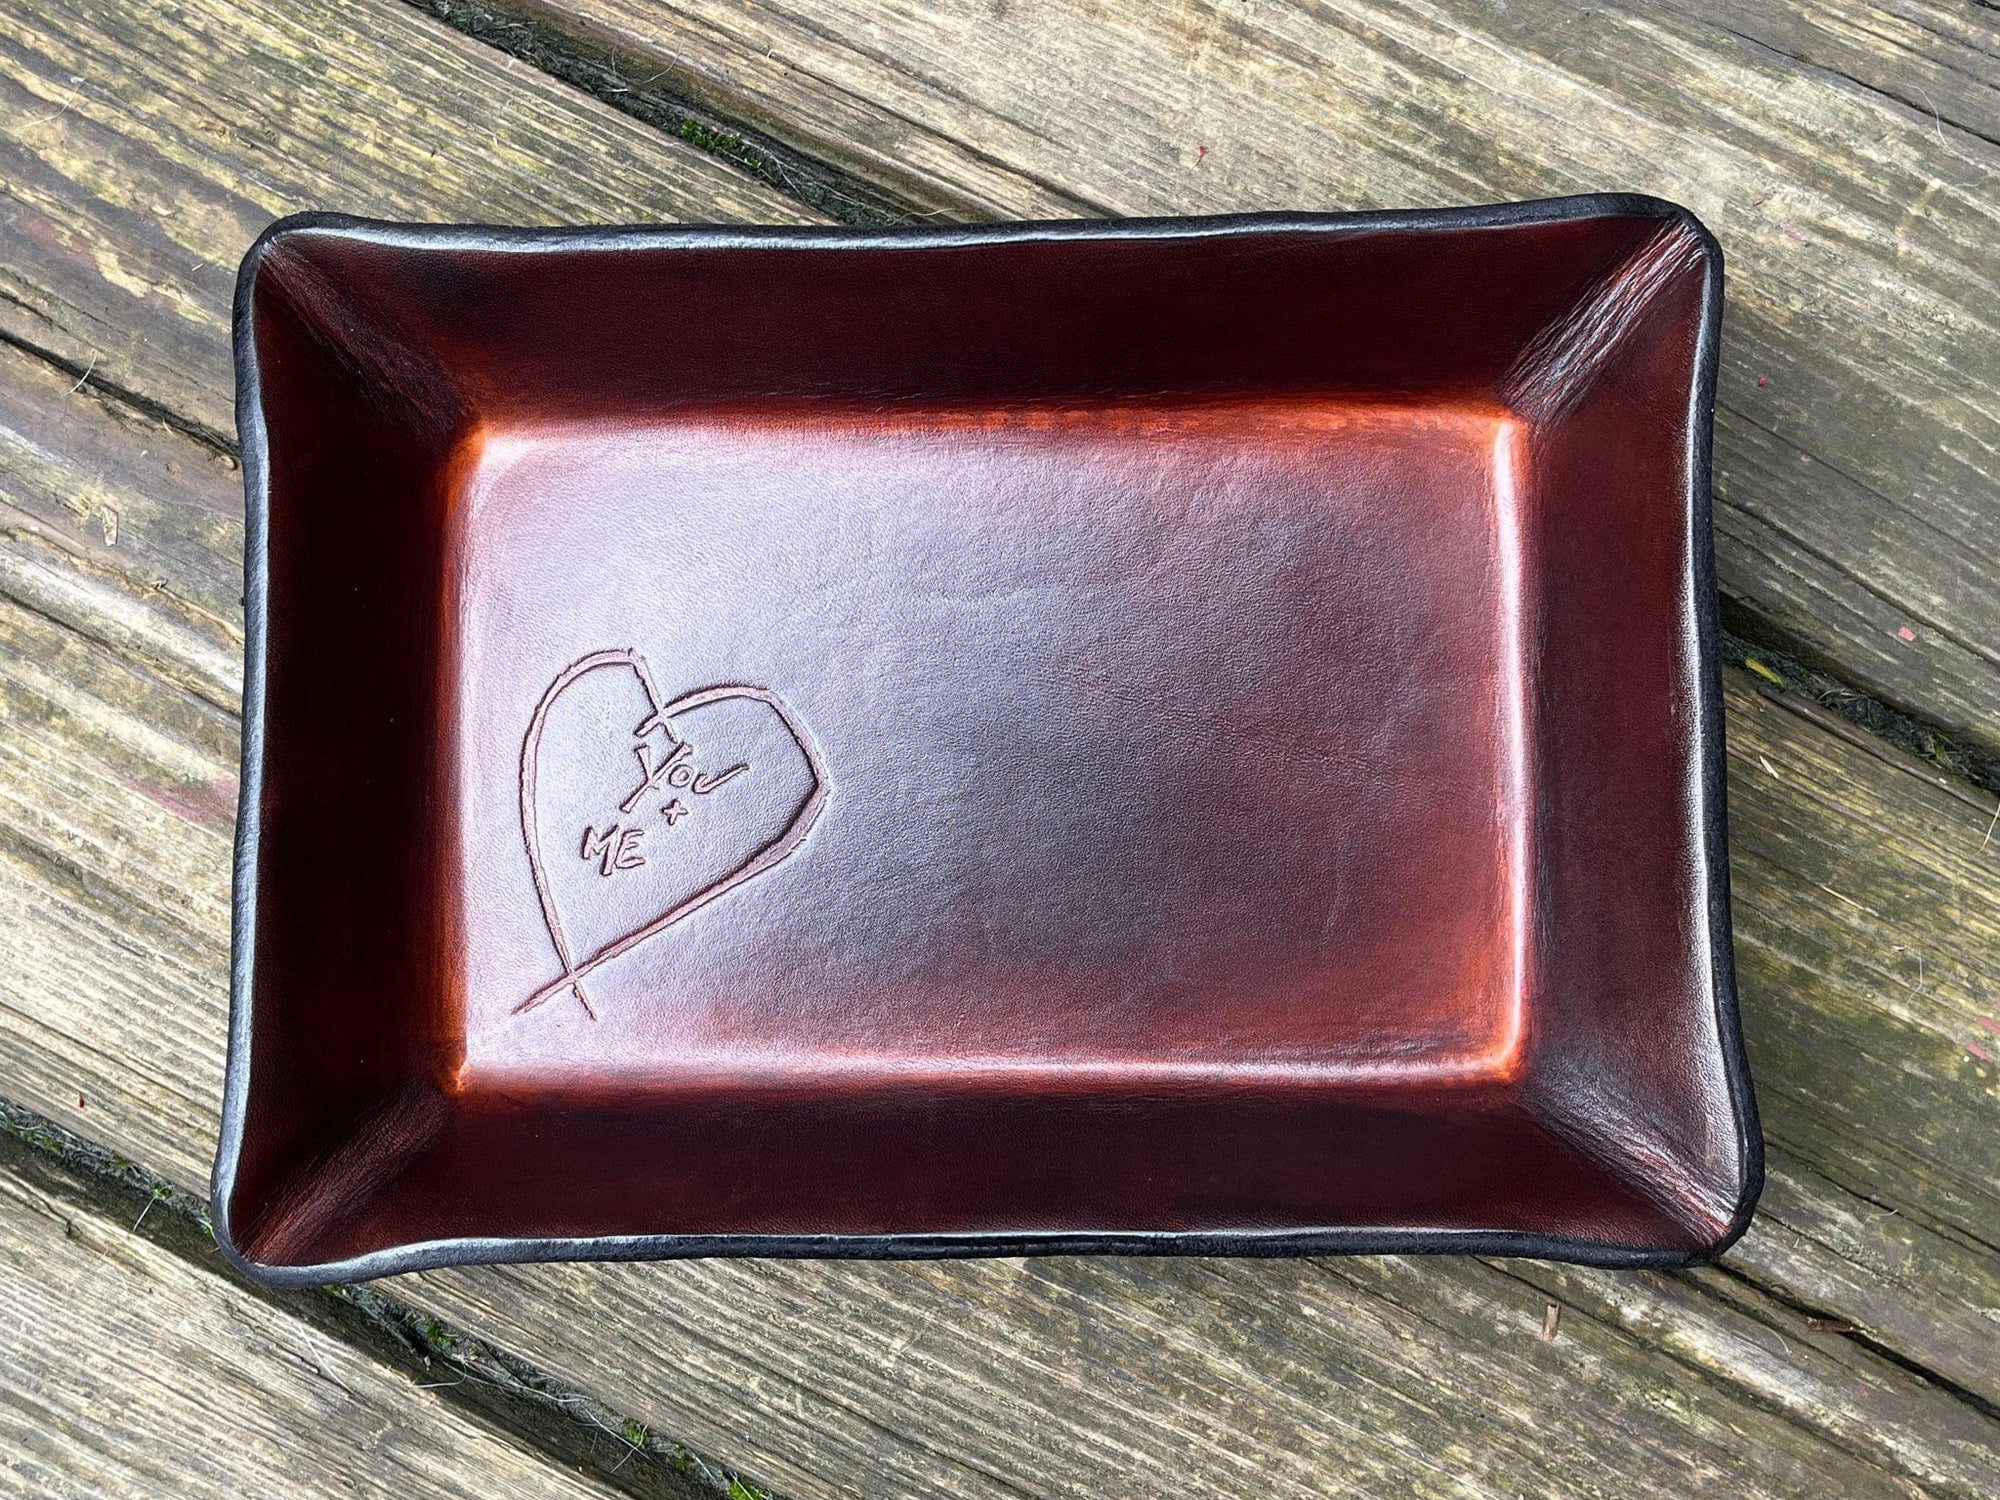 Timber brown leather valet tray with embossed heart that says "you + me"